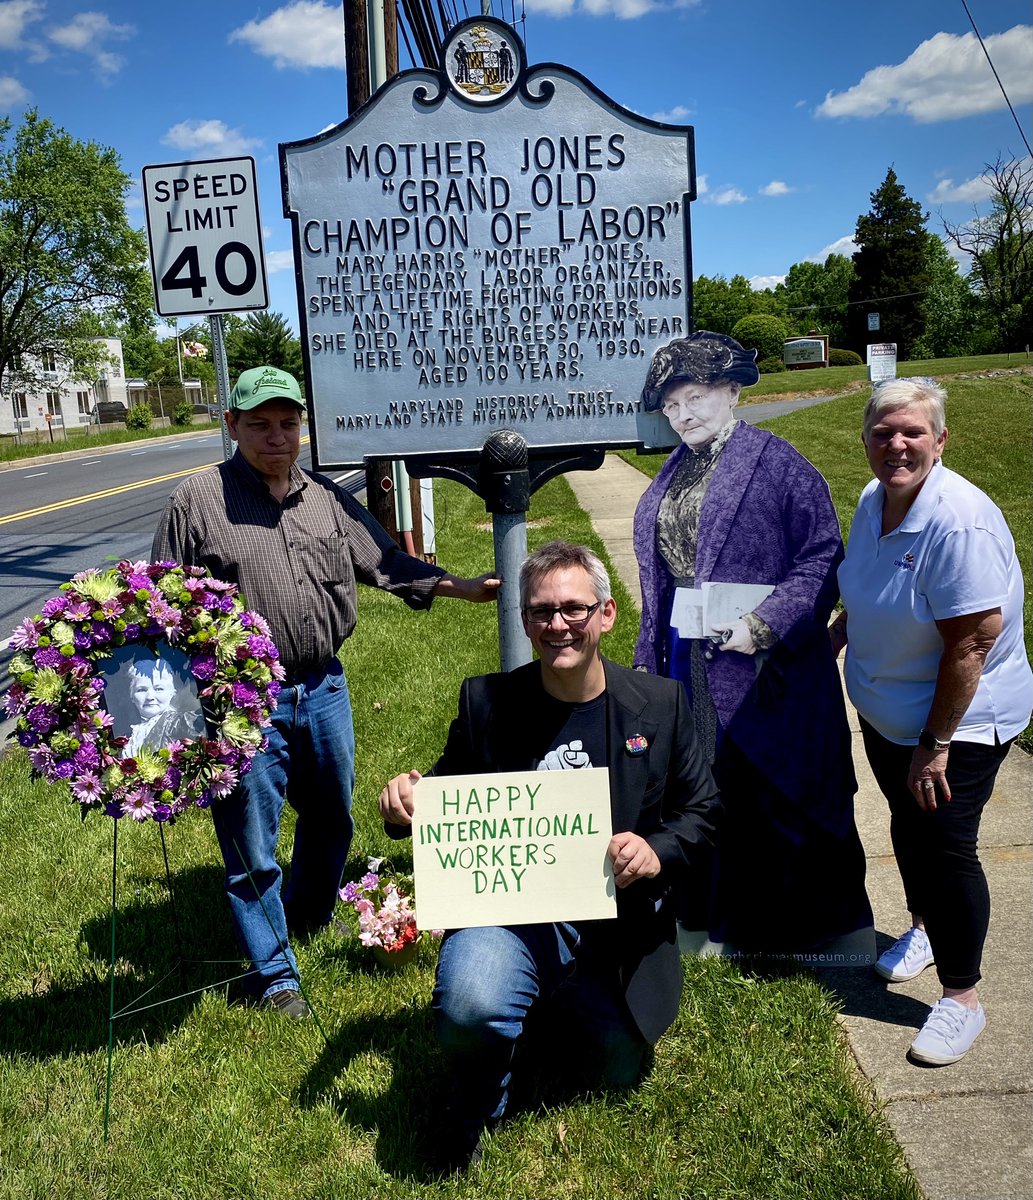 Happy #InternationalWorkersDay! ✊ Some Union Plus staff members (@OPEIULocal2!) joined other union members for the annual wreath-laying at the Mother Jones historic marker in Adelphi, MD today. We love getting to take part in this memorial every year. #1u #UnionStrong